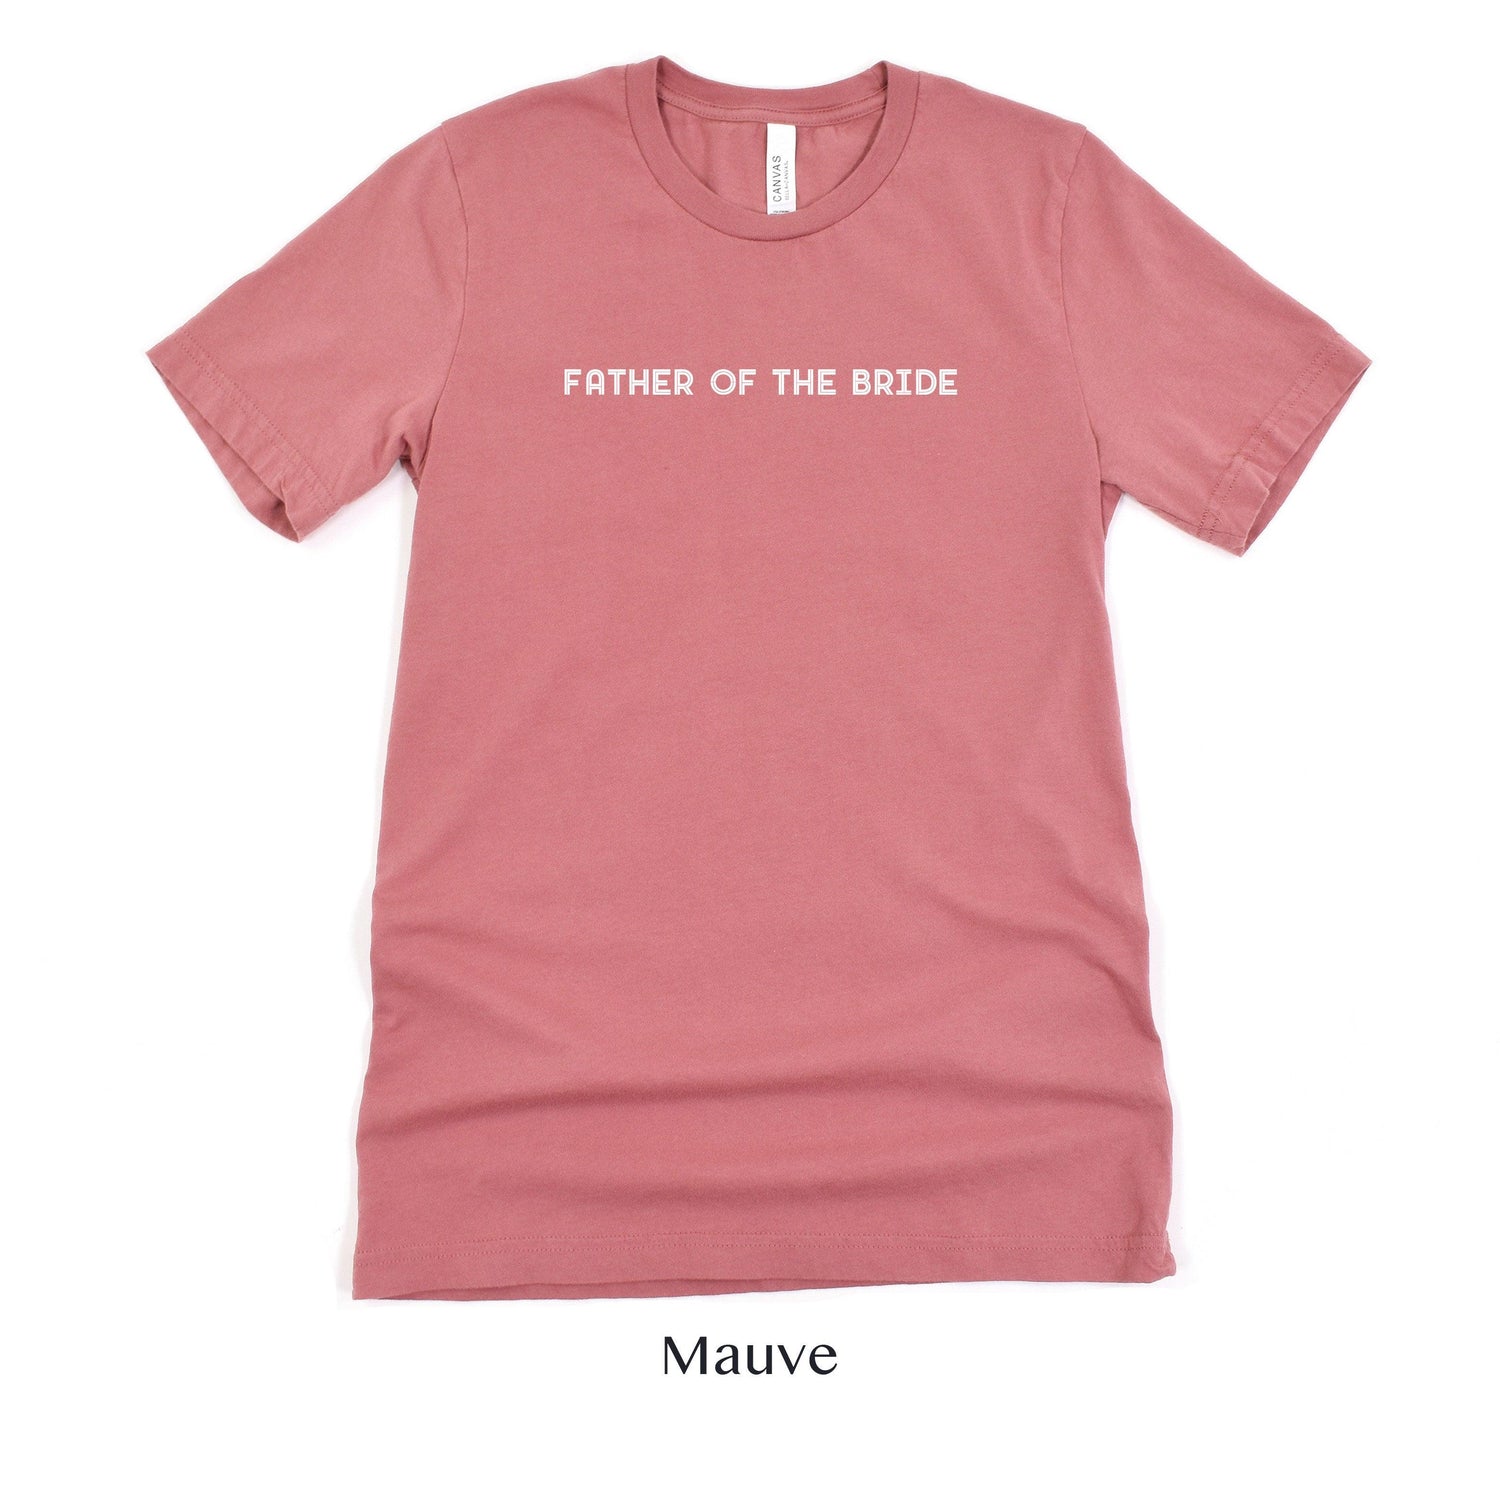 Father of the Bride Shirt - Matching Wedding Party Tshirts - Unisex t-shirt by Oaklynn Lane